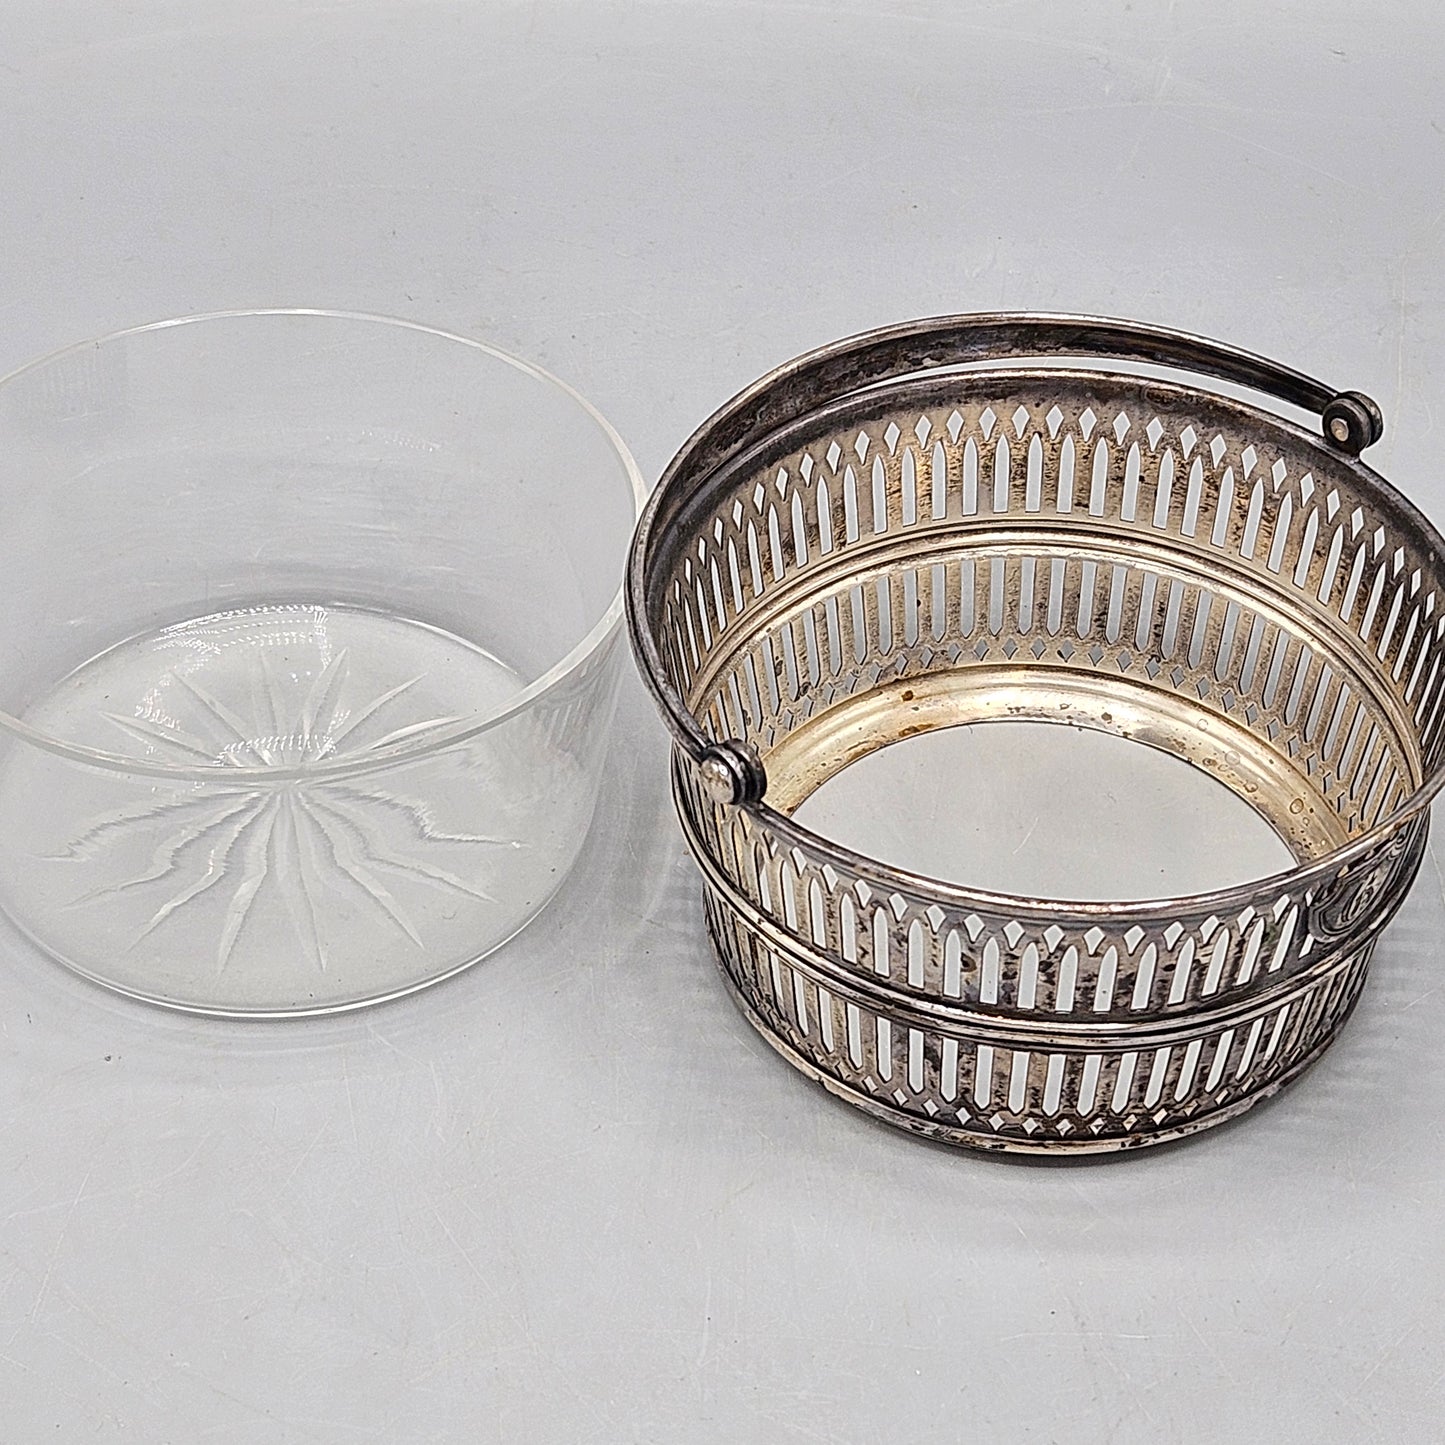 Vintage Sterling Silver Pierced Basket with Glass Insert